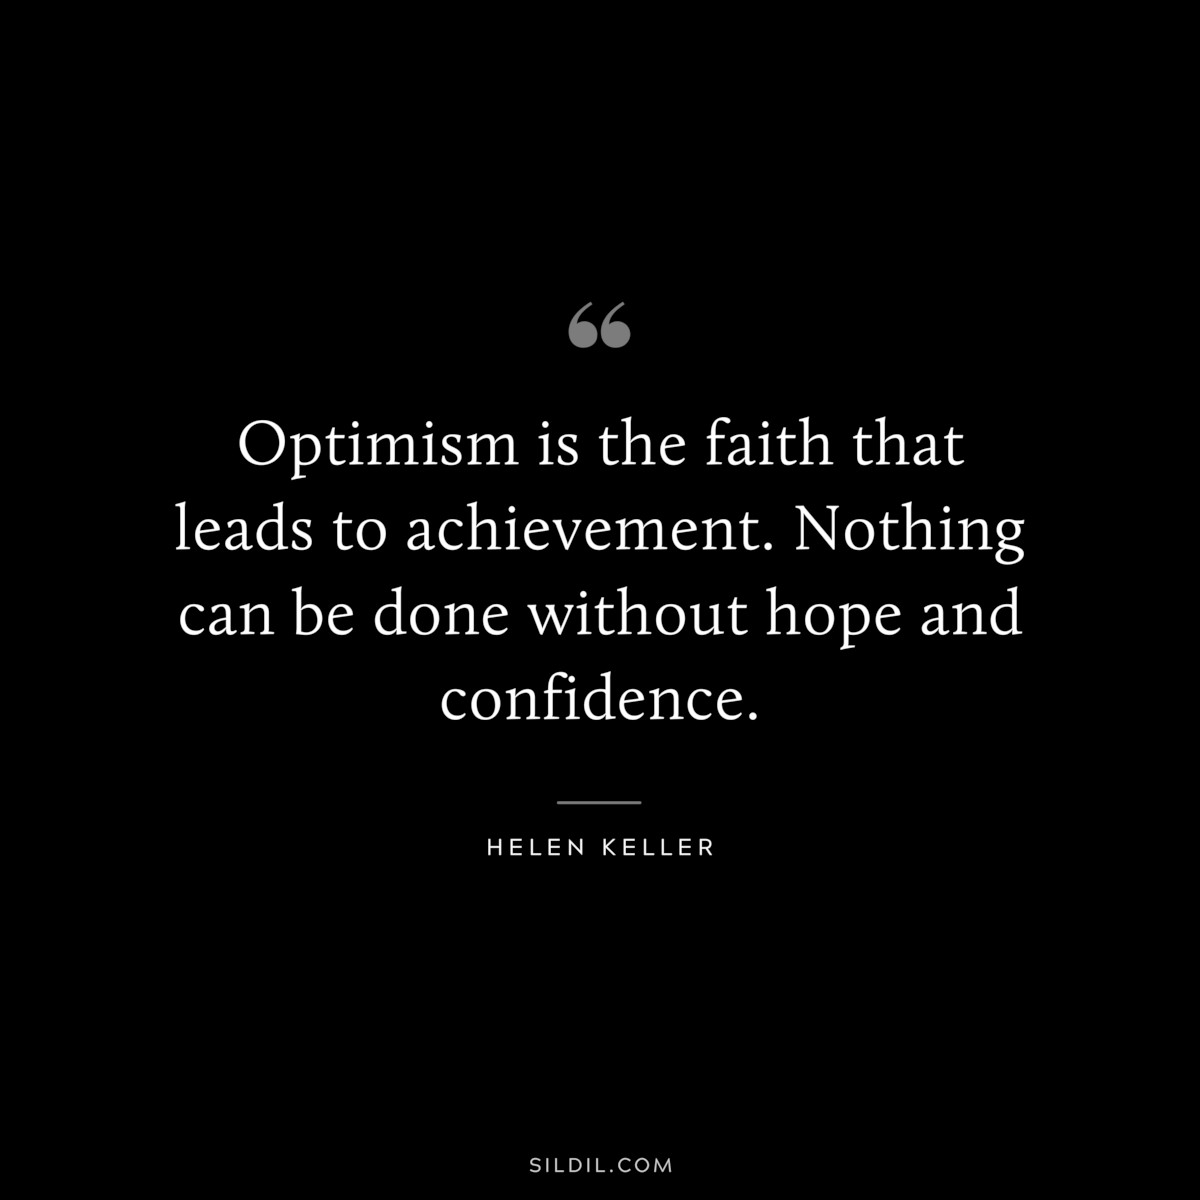 Optimism is the faith that leads to achievement. Nothing can be done without hope and confidence. ― Helen Keller